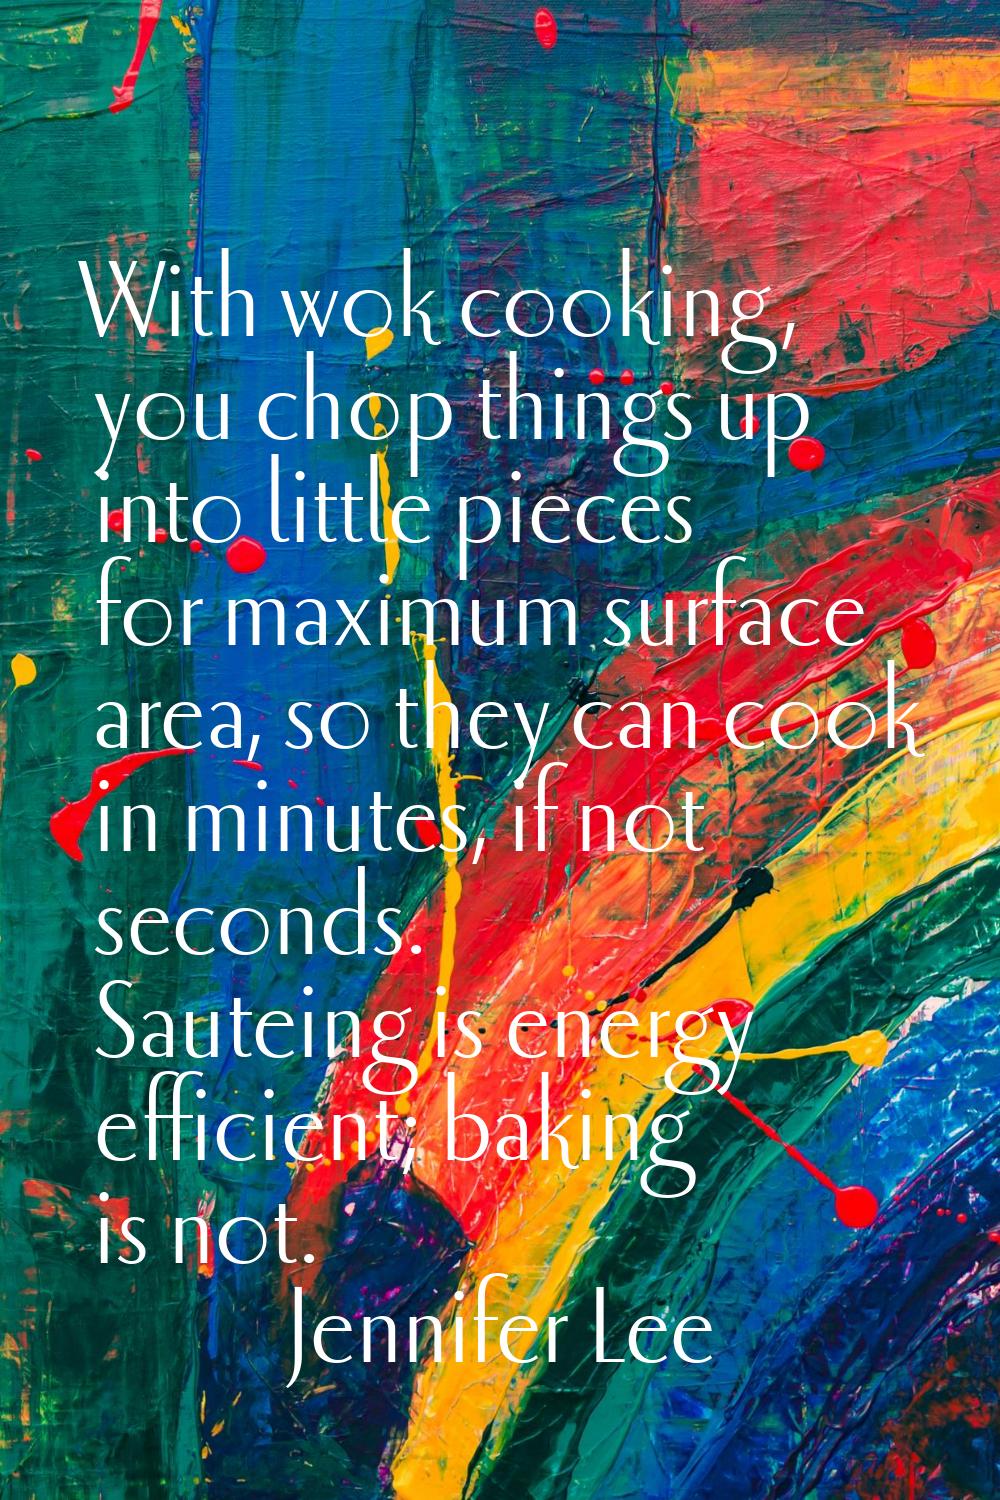 With wok cooking, you chop things up into little pieces for maximum surface area, so they can cook 